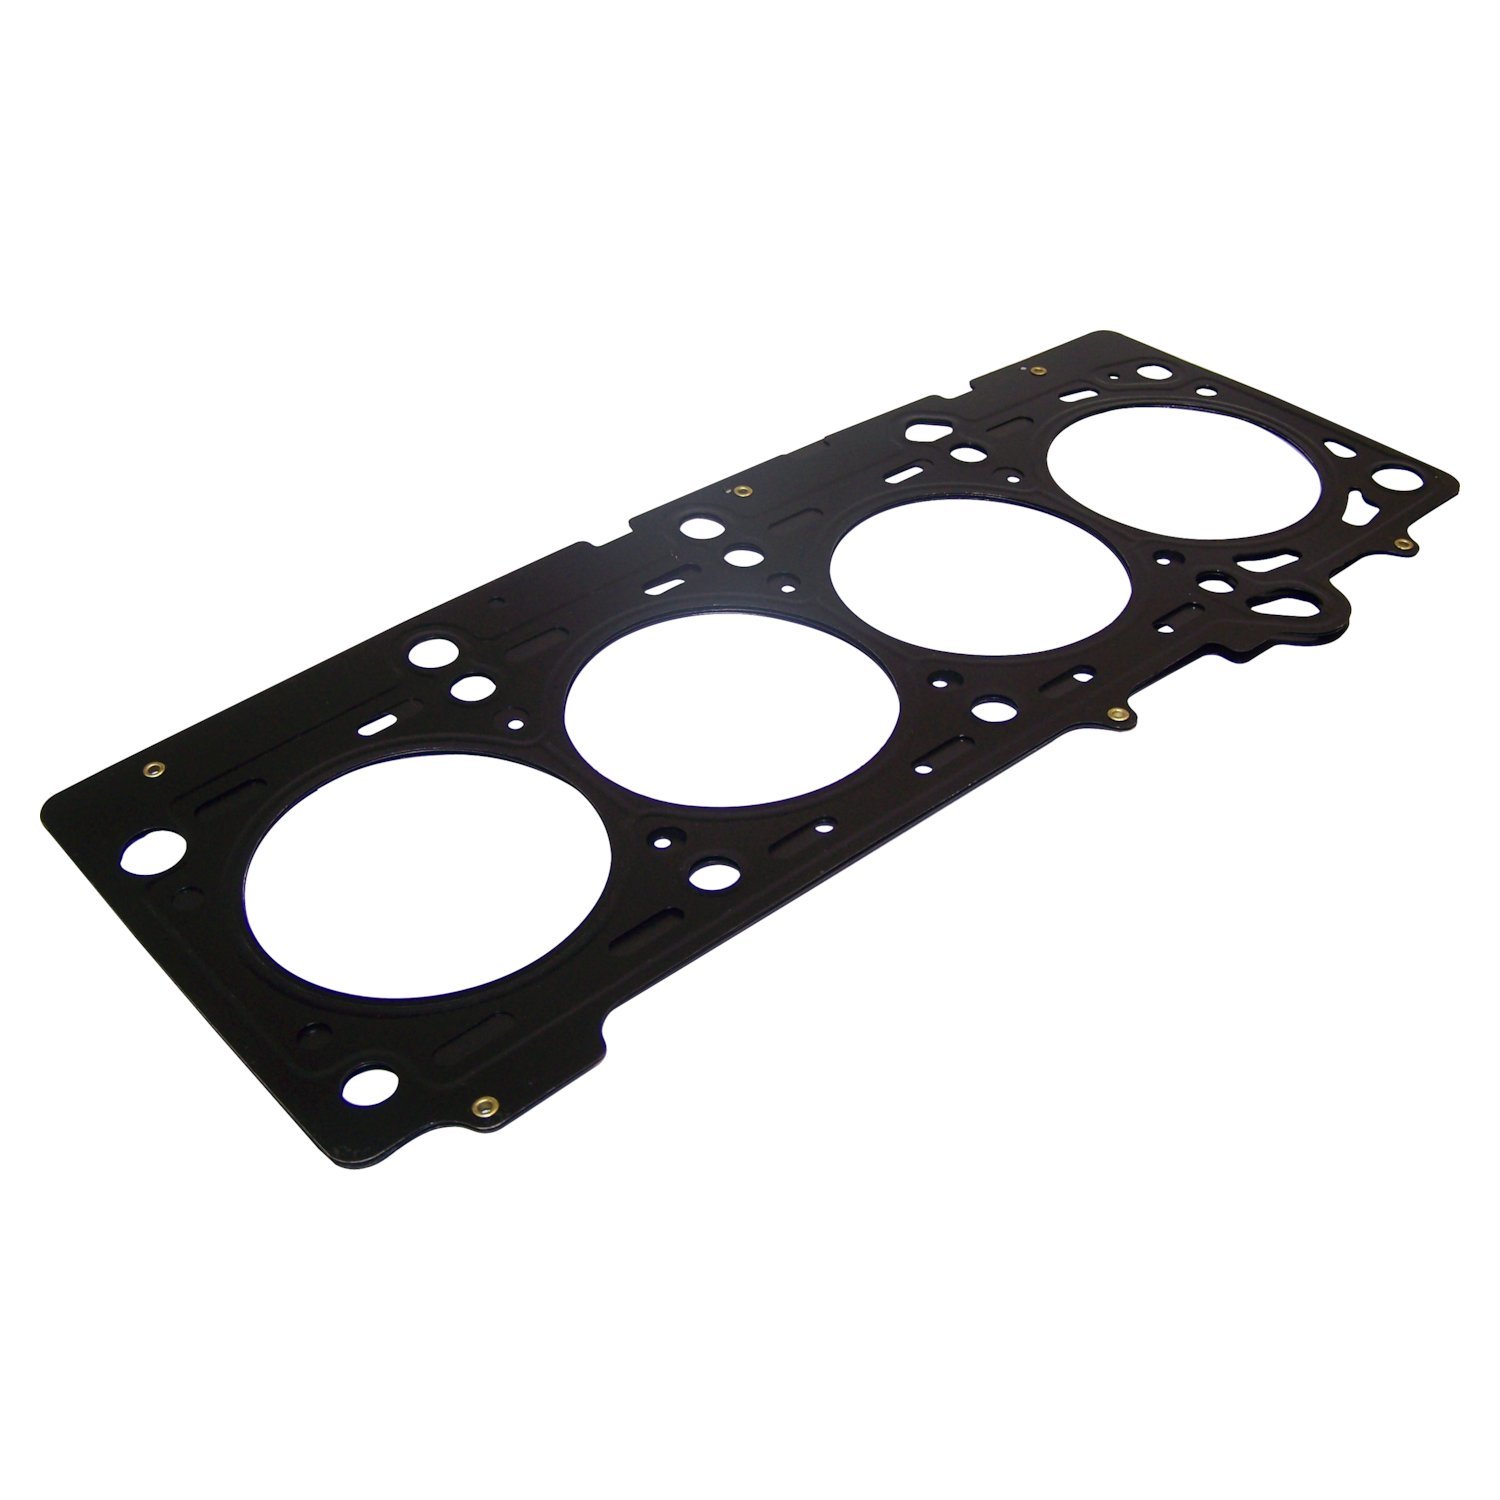 Engine Cylinder Head Gasket for Various Jeep, Dodge, Chrysler, Plymouth  Vehicles Jeep Recyclers